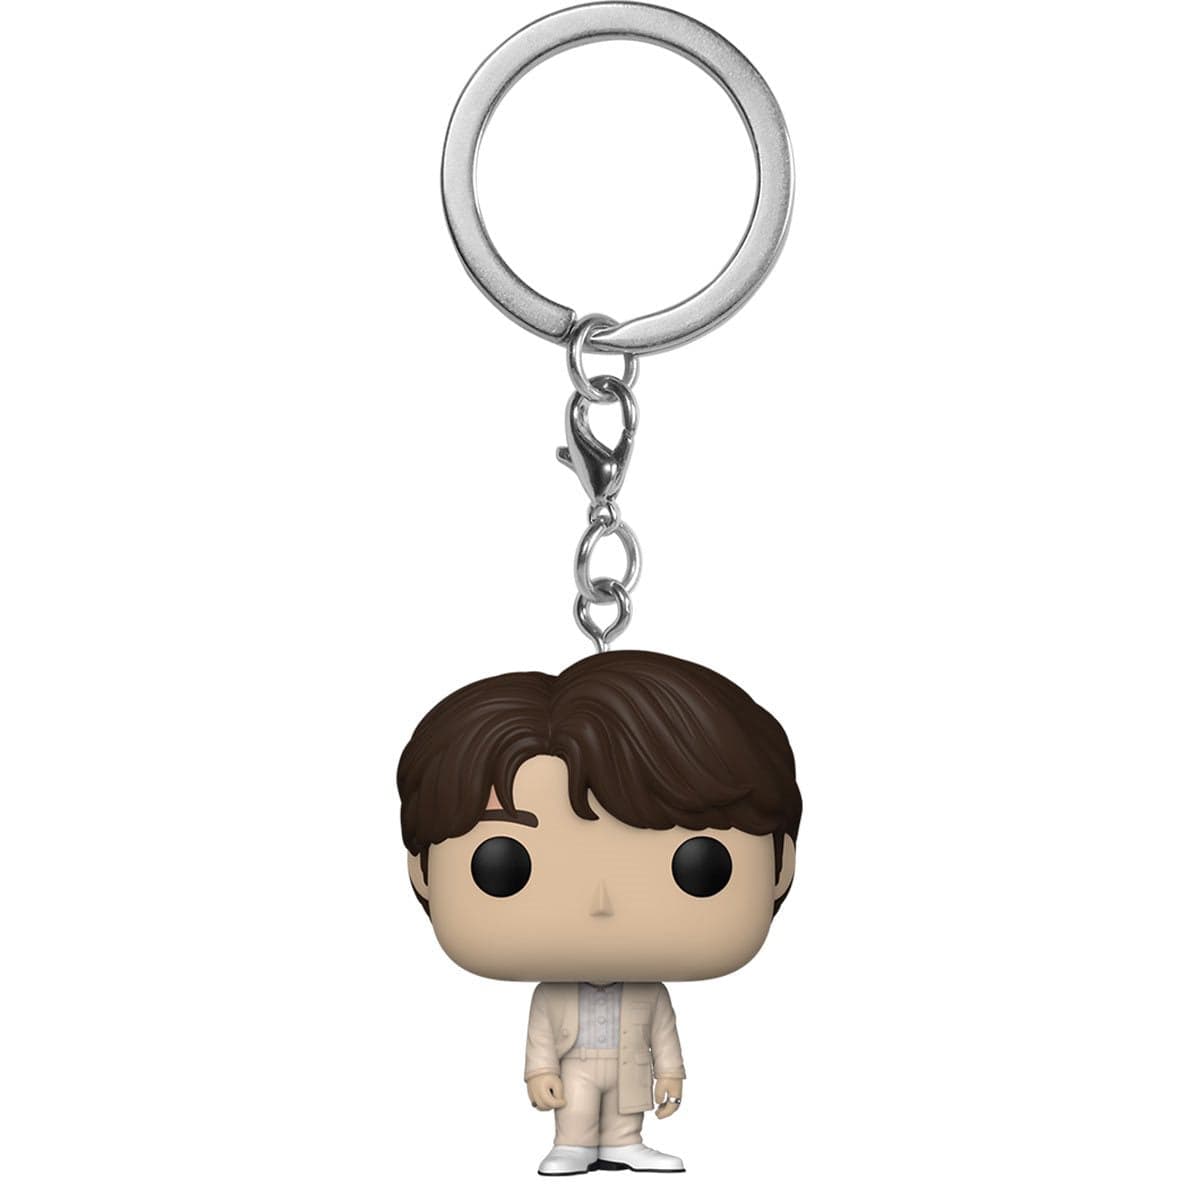 FUNKO POCKET POP! BTS - Jin keychain, 56030 reference, keychain, original,  toys, boys, girls, gifts, collector, figures, dolls, shop, with box, new,  man, woman, official license - AliExpress